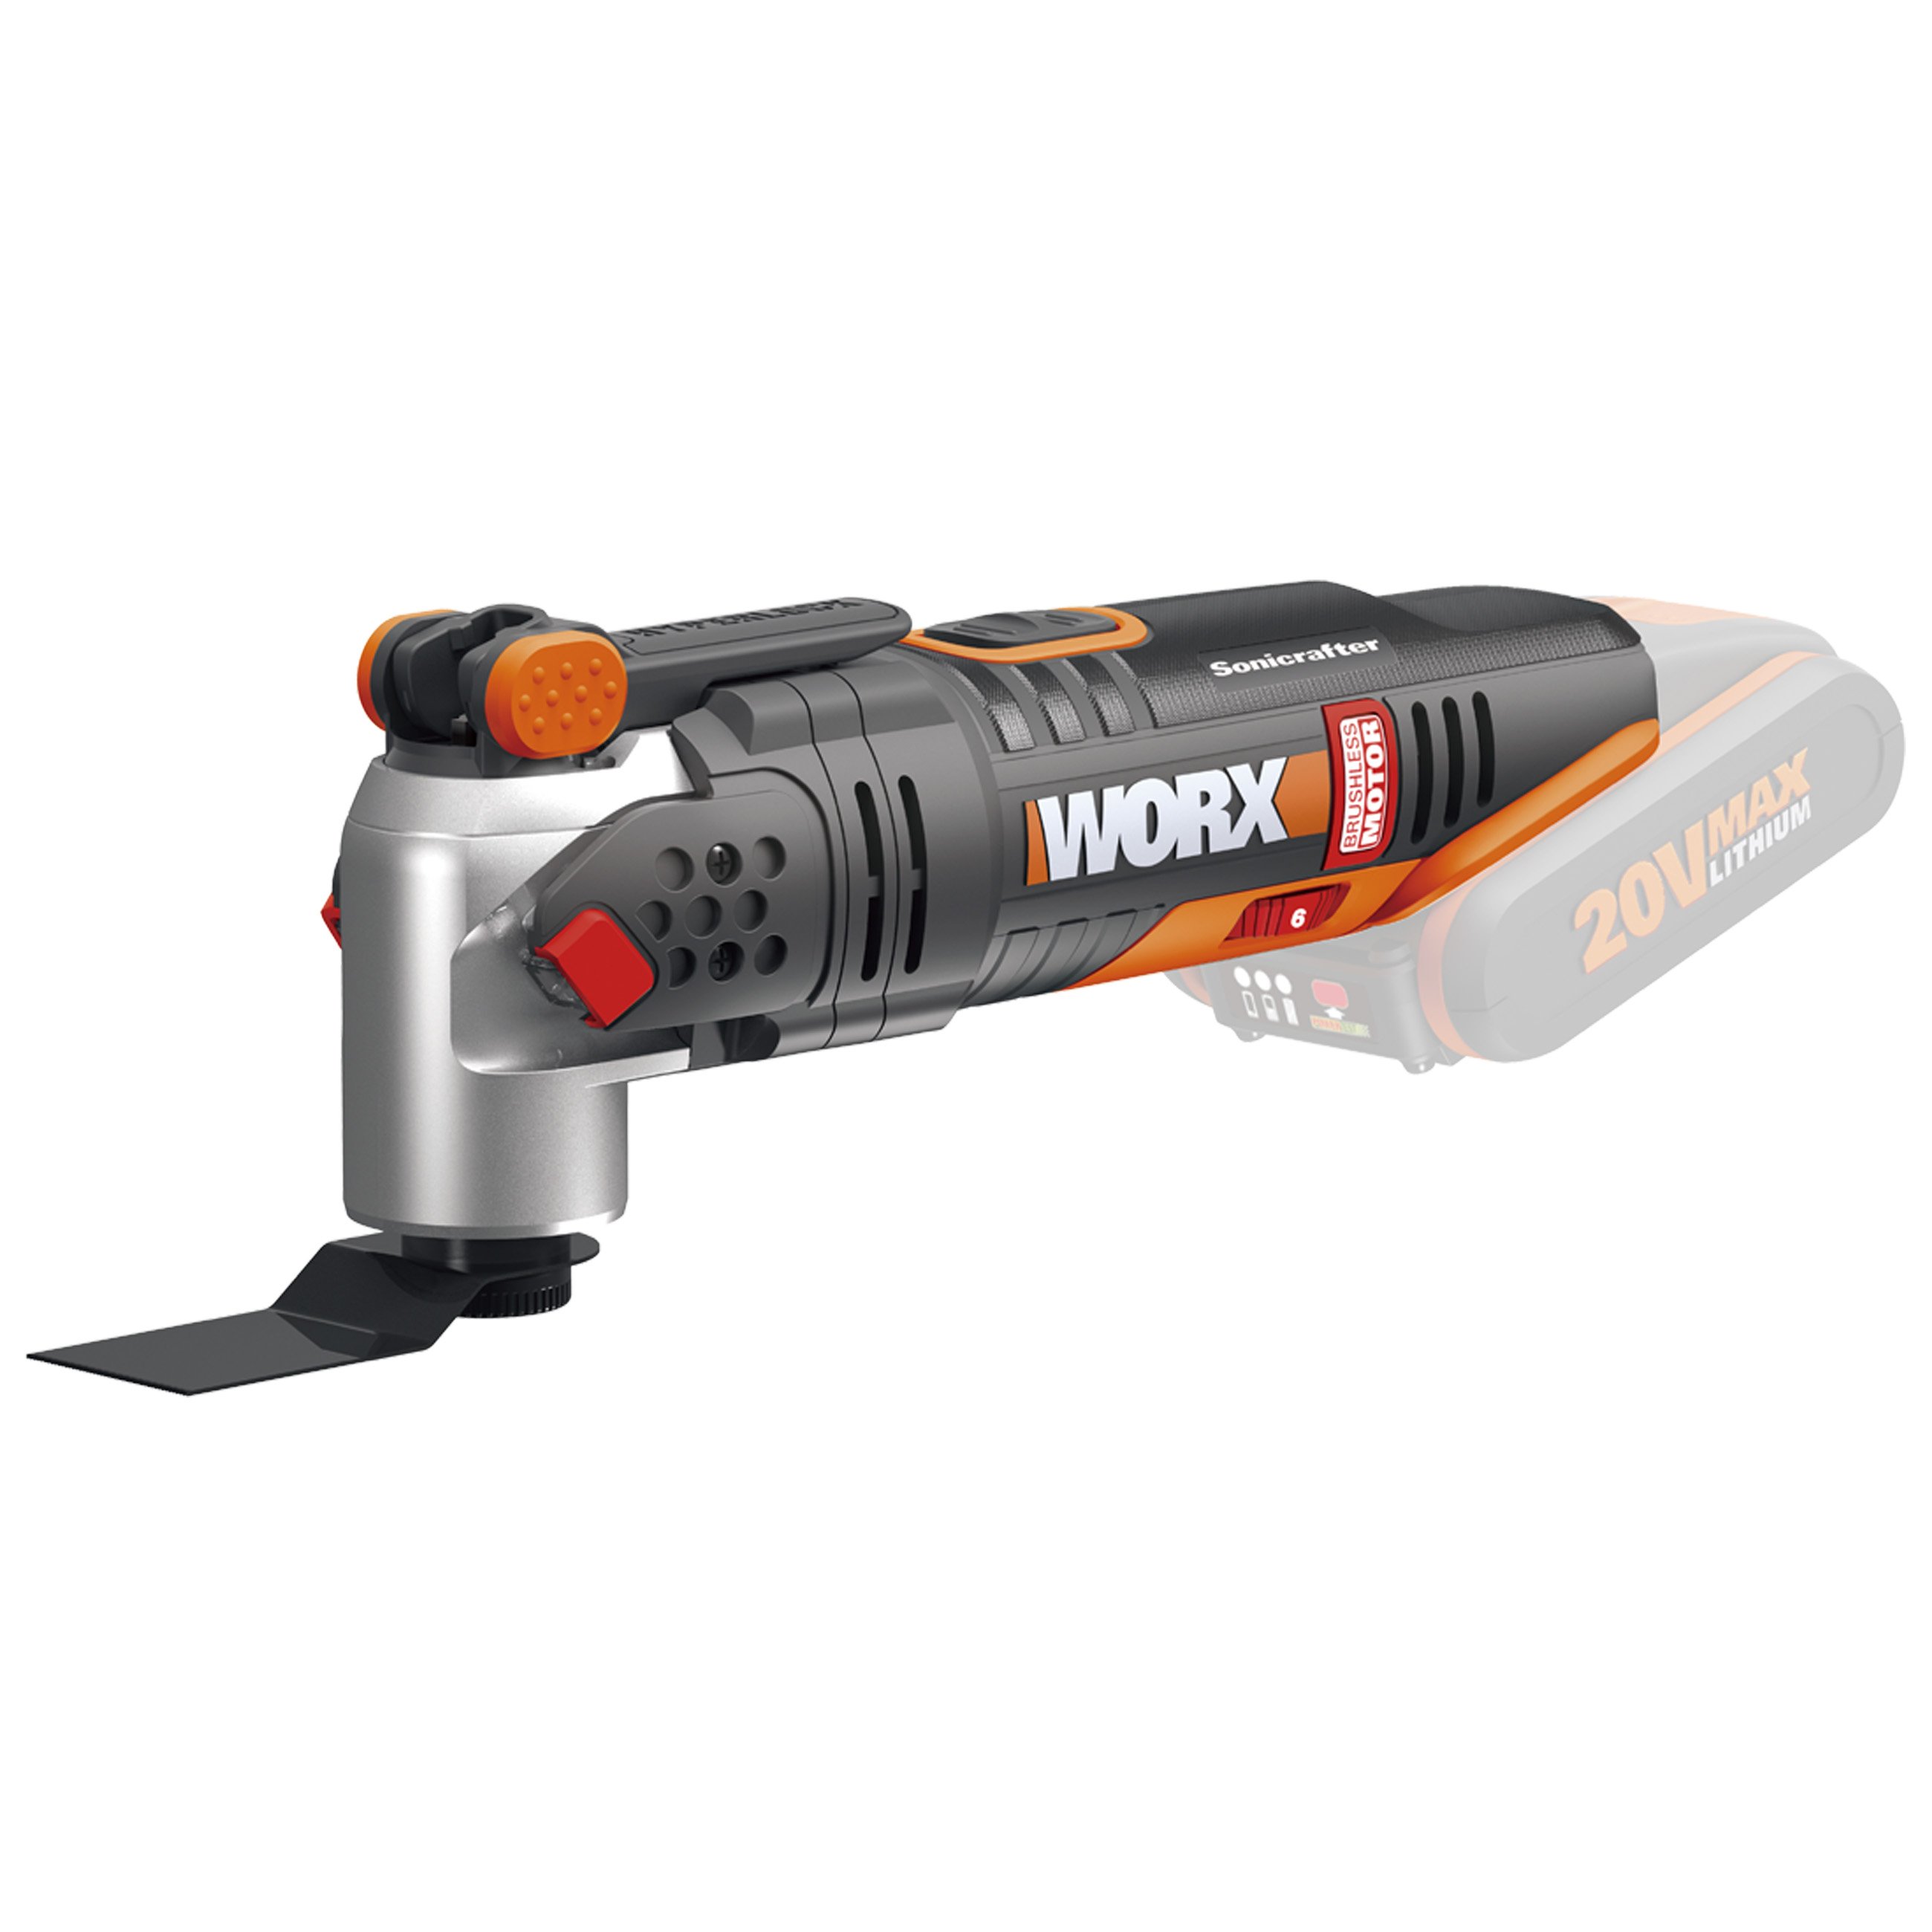 Worx 20V PowerShare Sonicrafter Oscillating Multi-Tool Kit WX696L